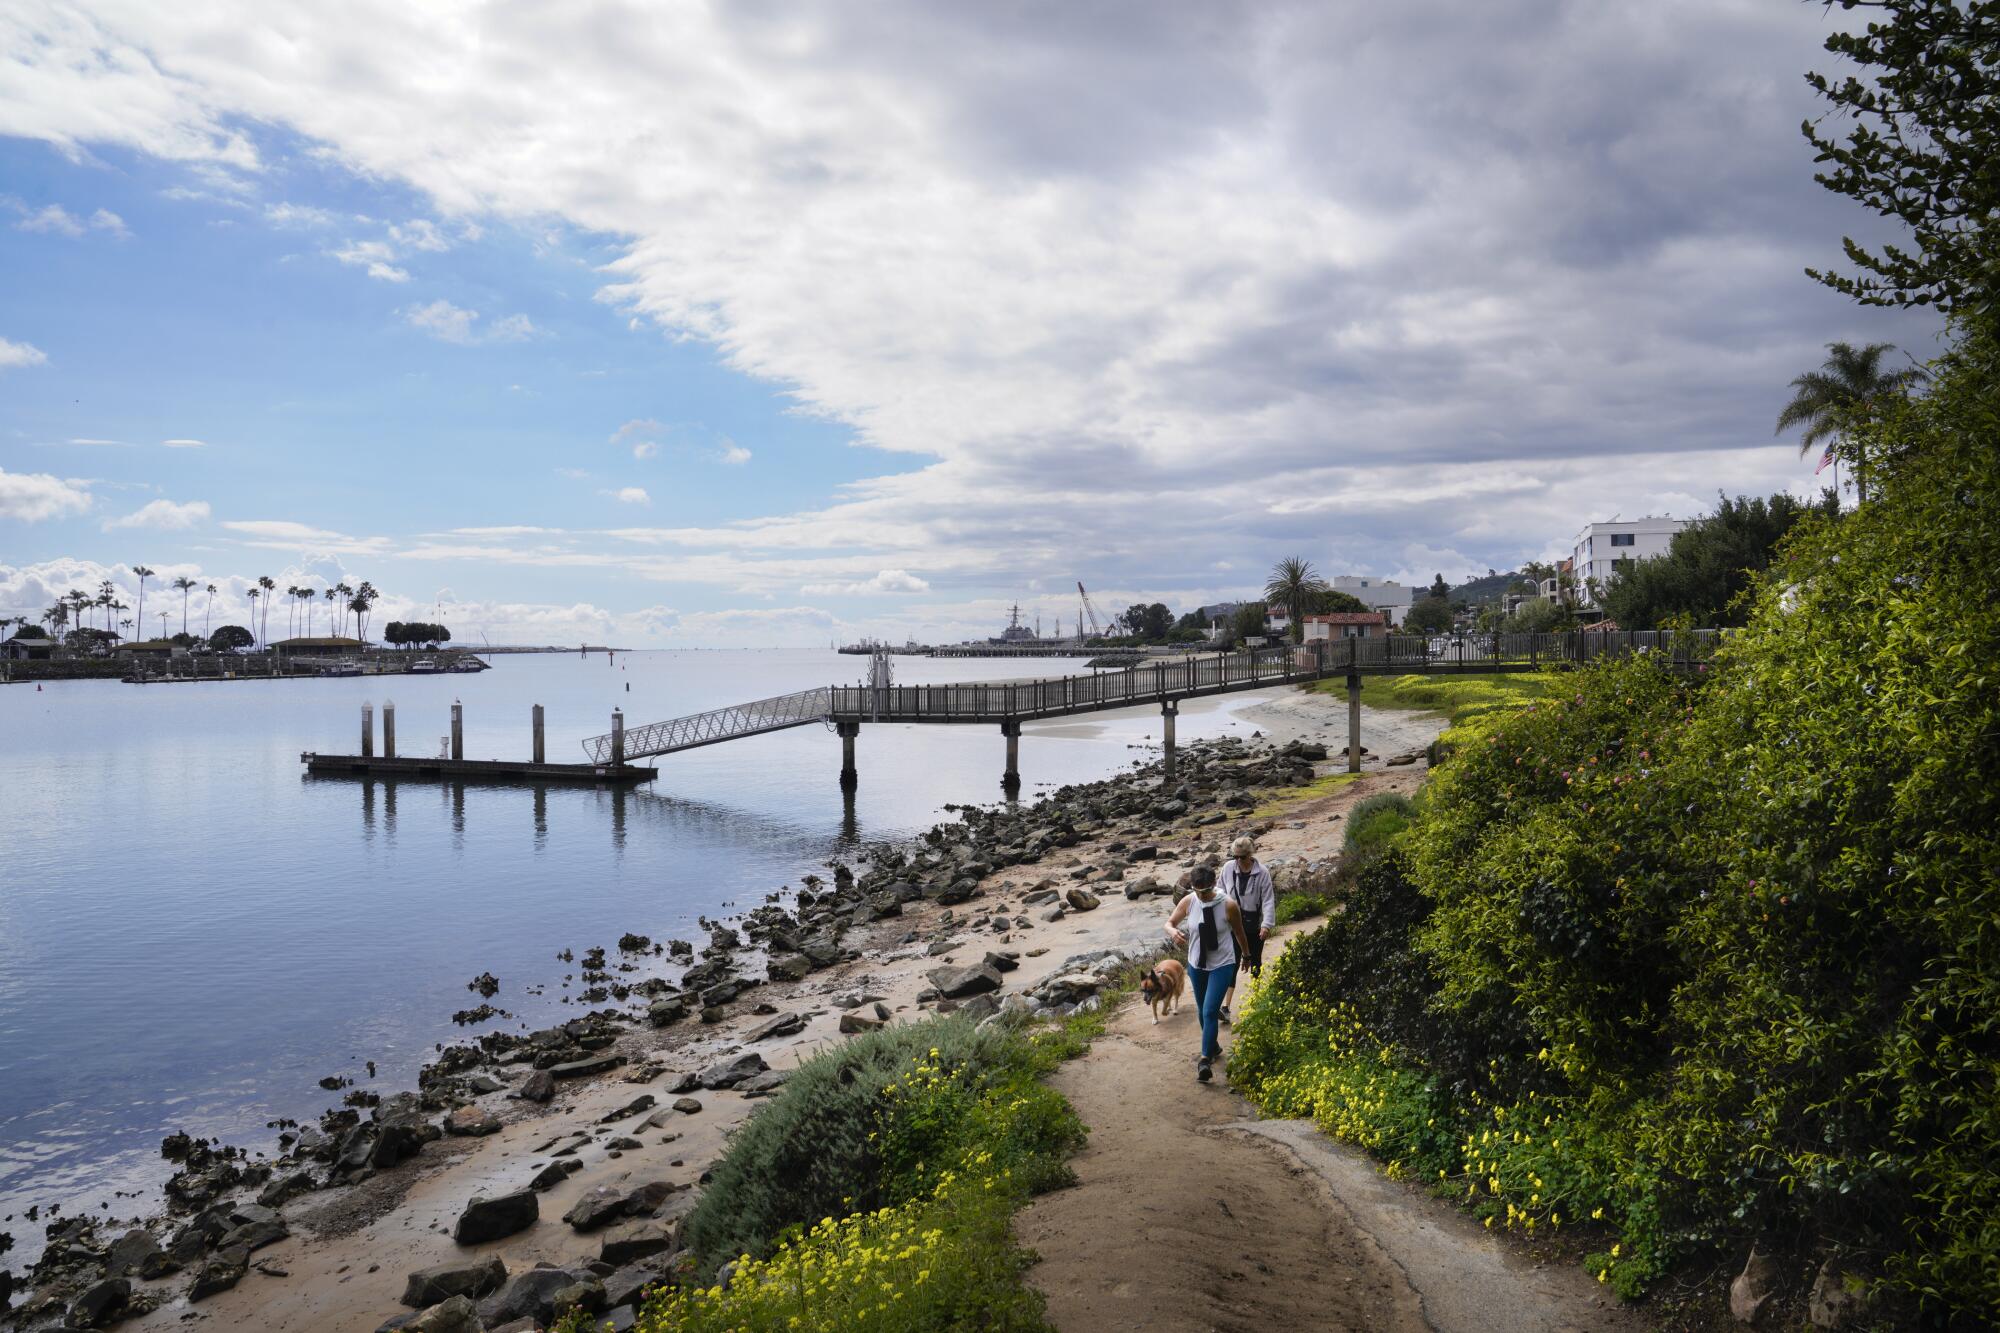 Private pier in San Diego's posh La Playa enclave will get public access  stairway - The San Diego Union-Tribune